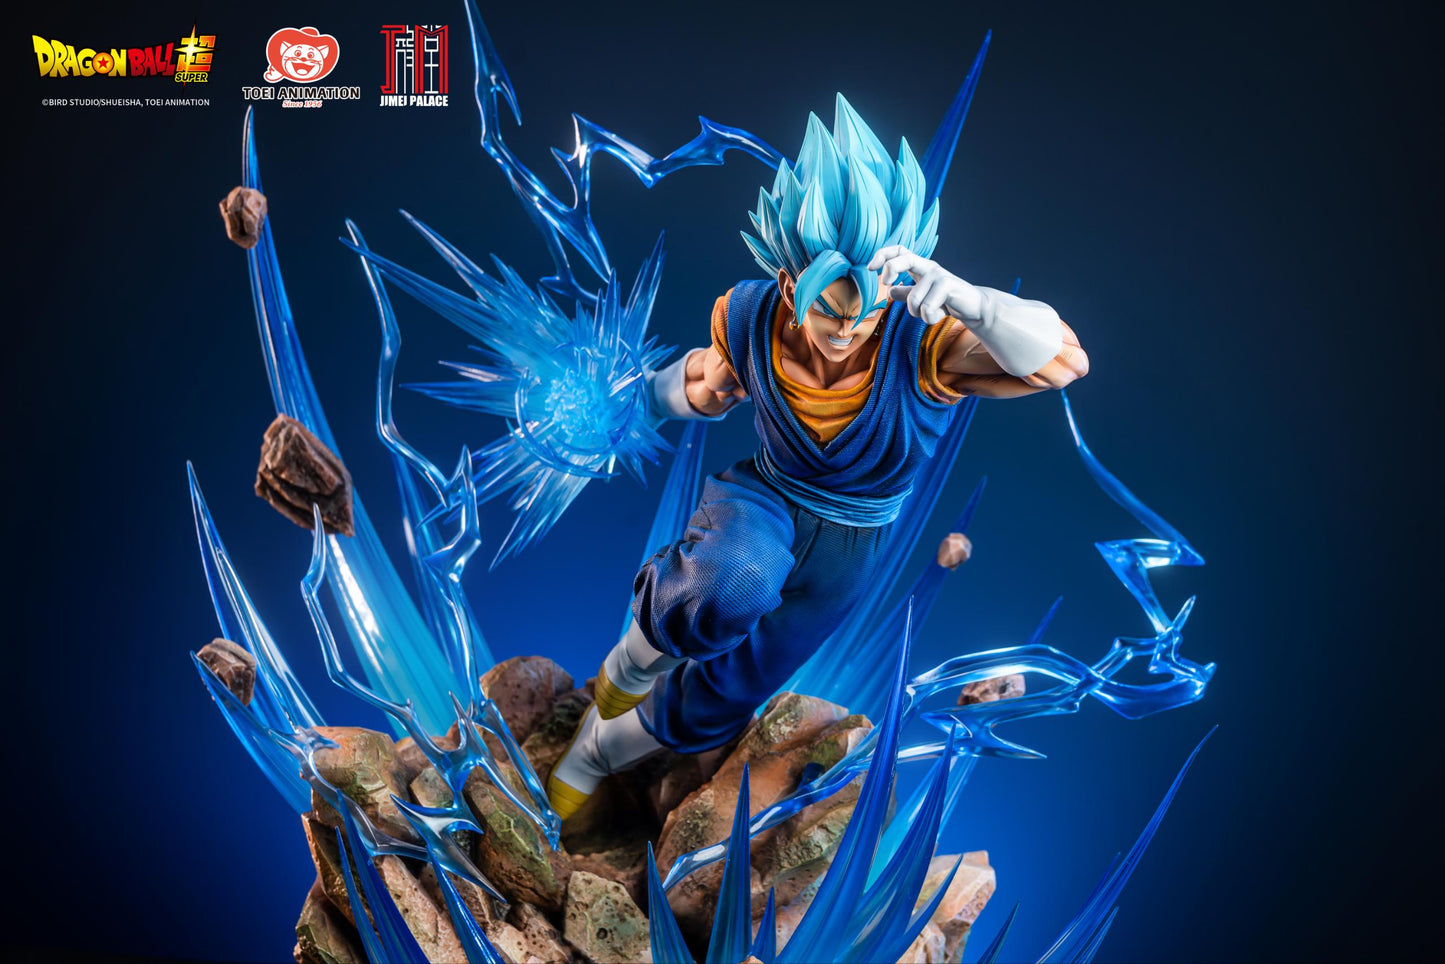 JIMEI PALACE STUDIO – DRAGON BALL SUPER: VEGETTO (LICENSED) [SOLD OUT]